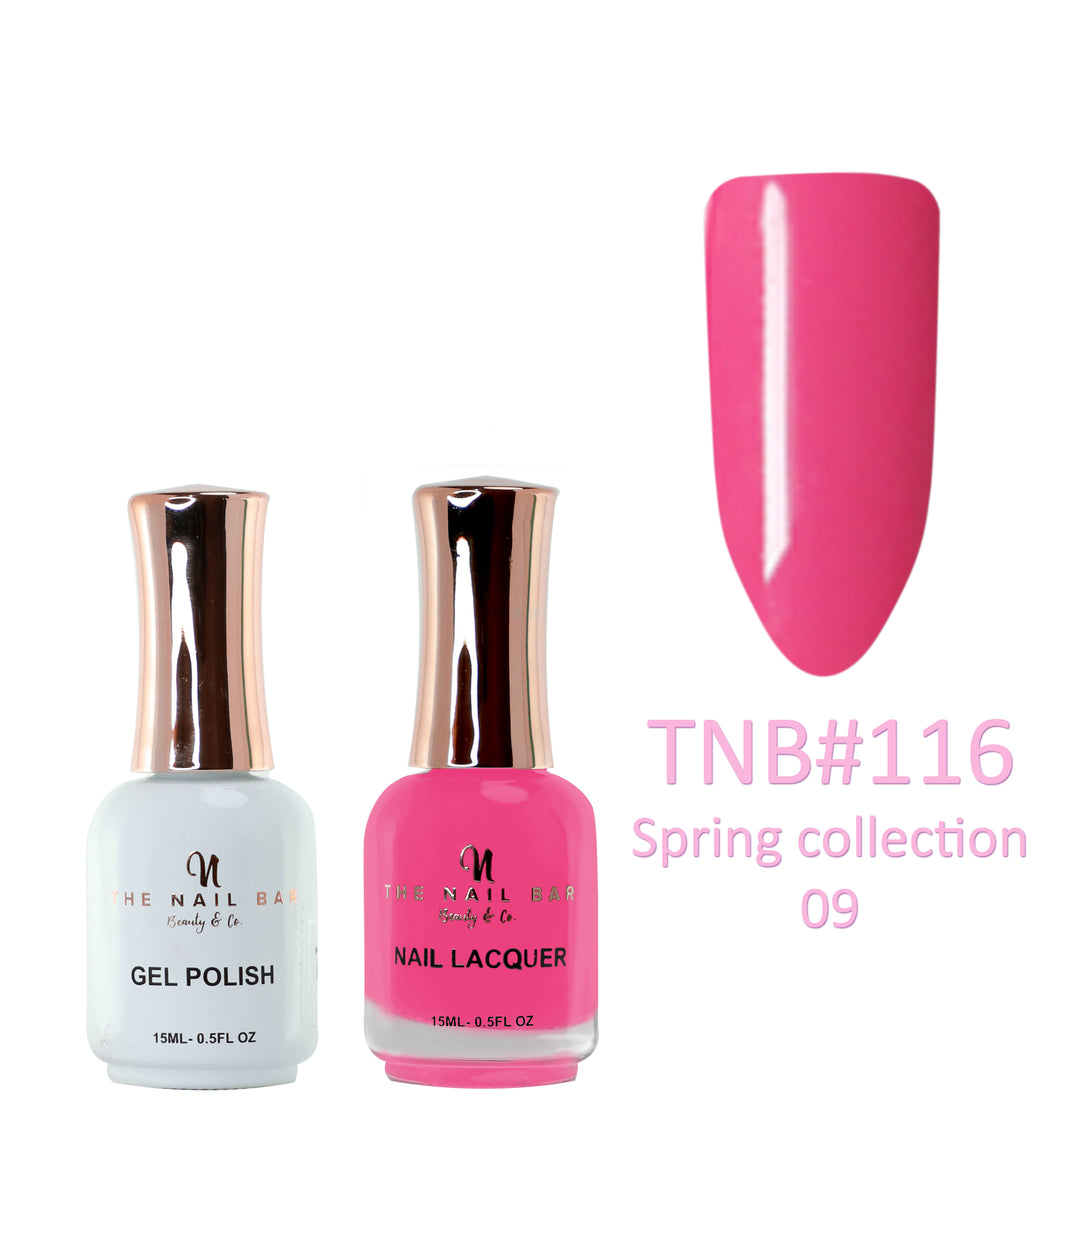 Dual Polish/Gel colour matching (15ml) - Spring Collection 09